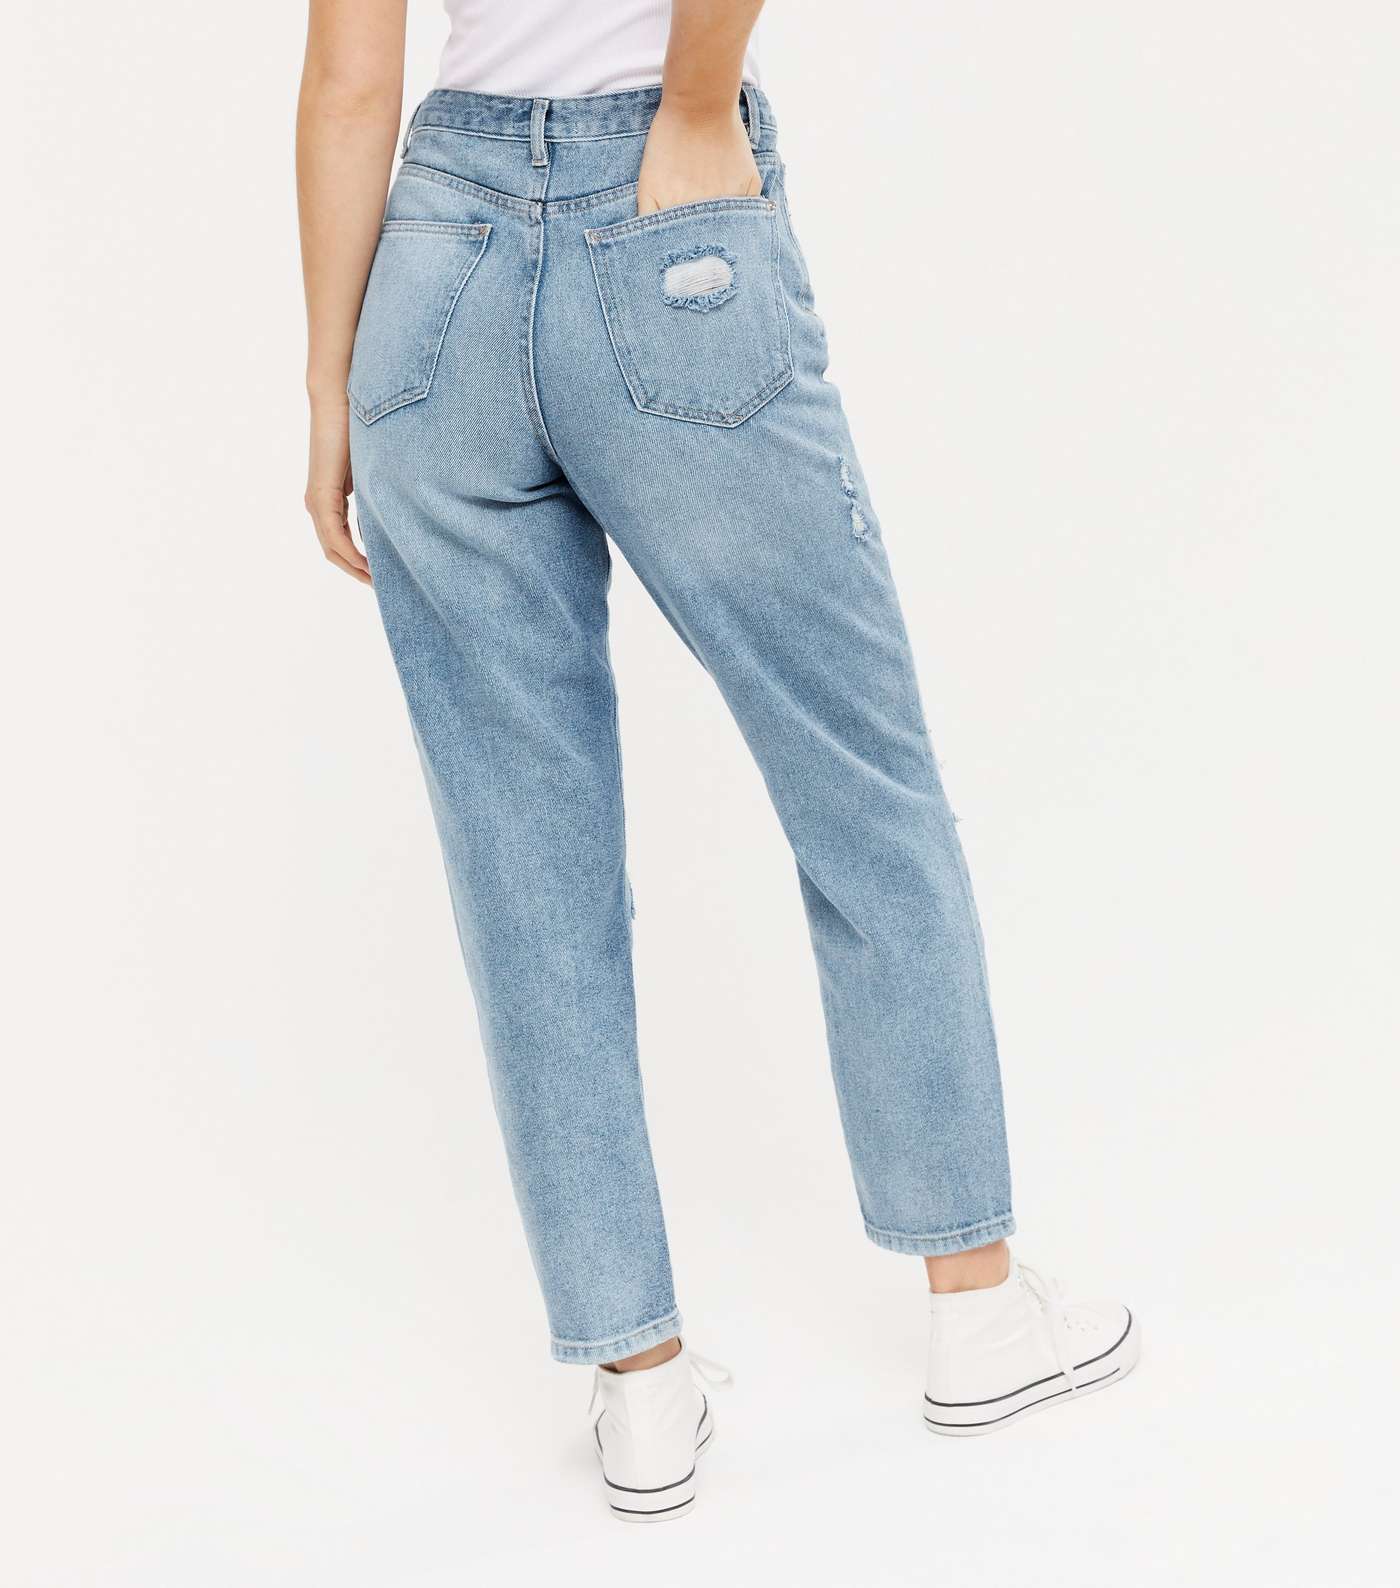 Urban Bliss Blue Ripped Mom Jeans Image 4